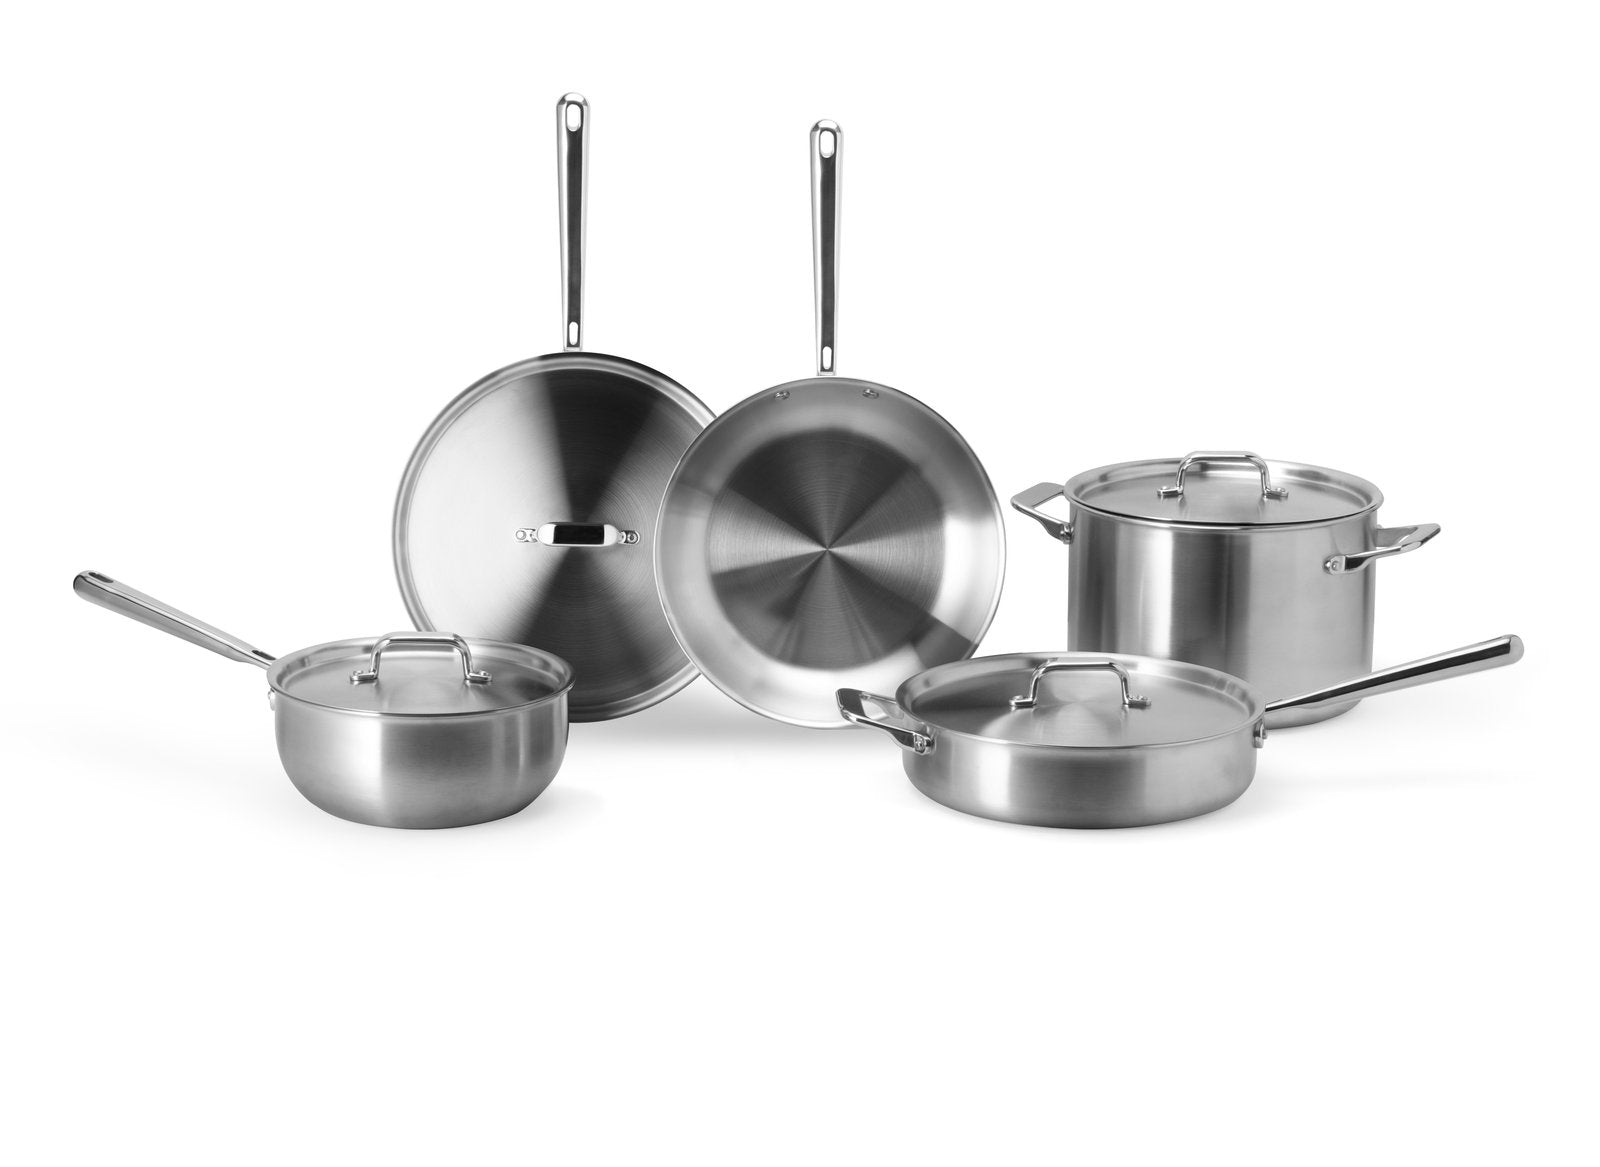 Types of pots and pans: a set of Misen stainless steel pans